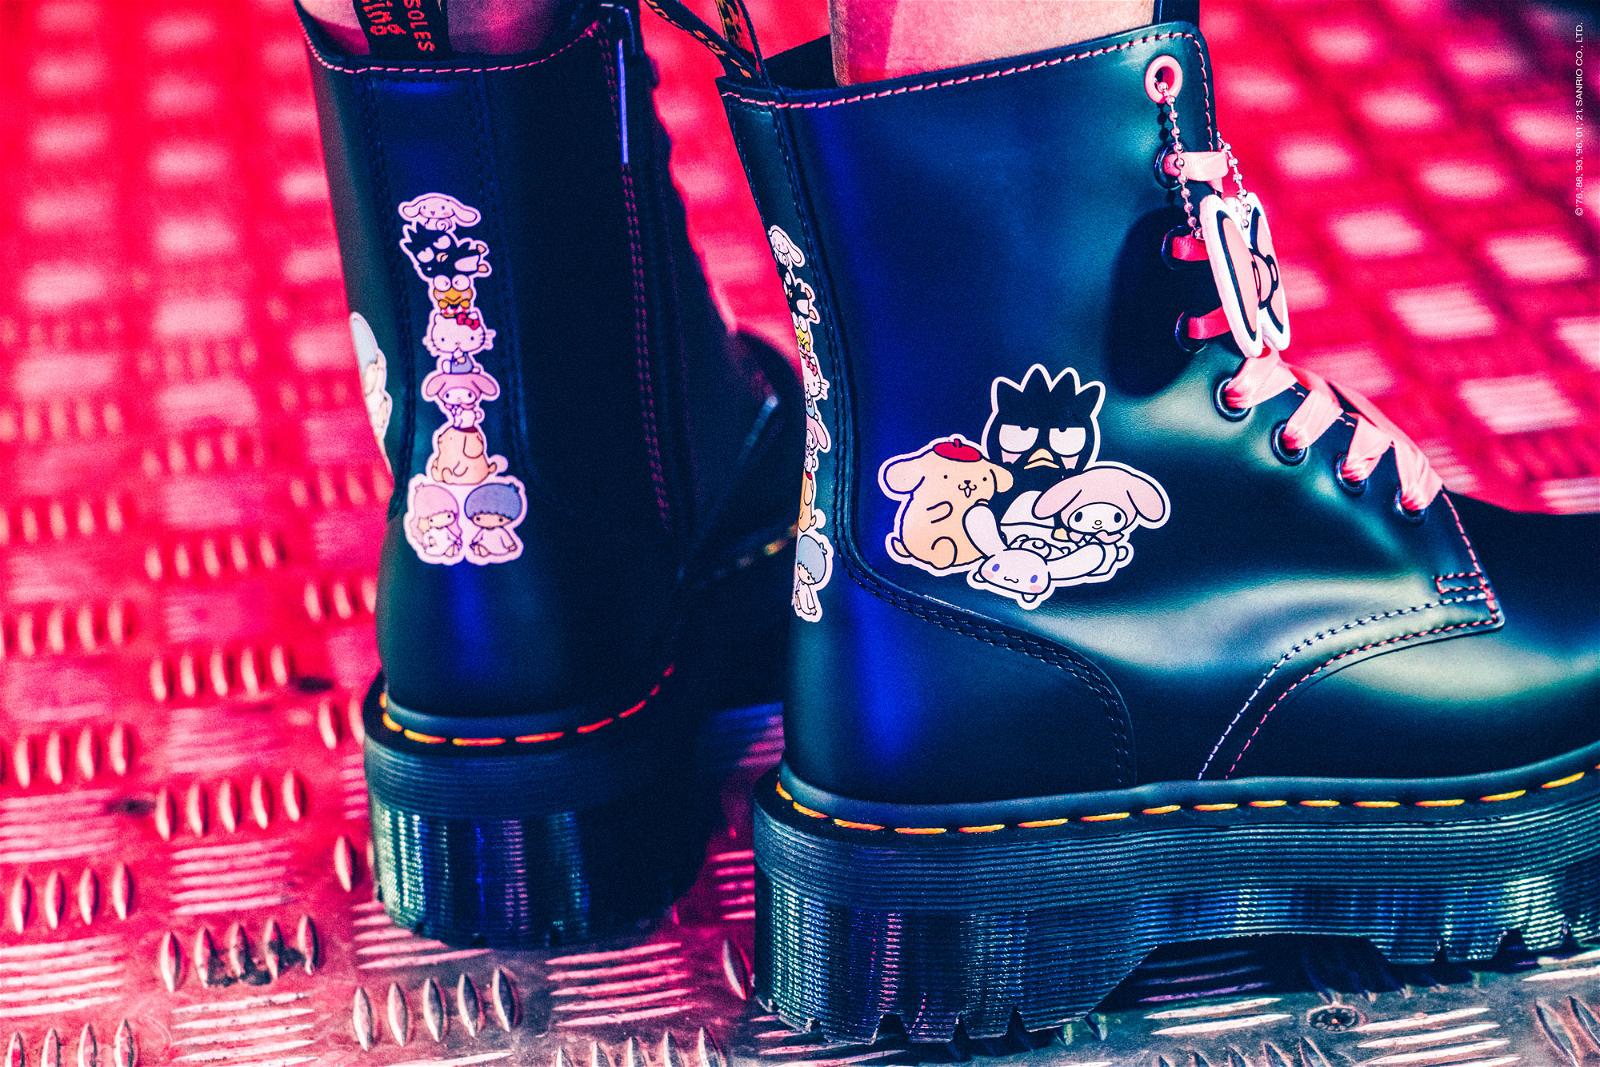 Dr. Martens x Hello Kitty & Friends Collection